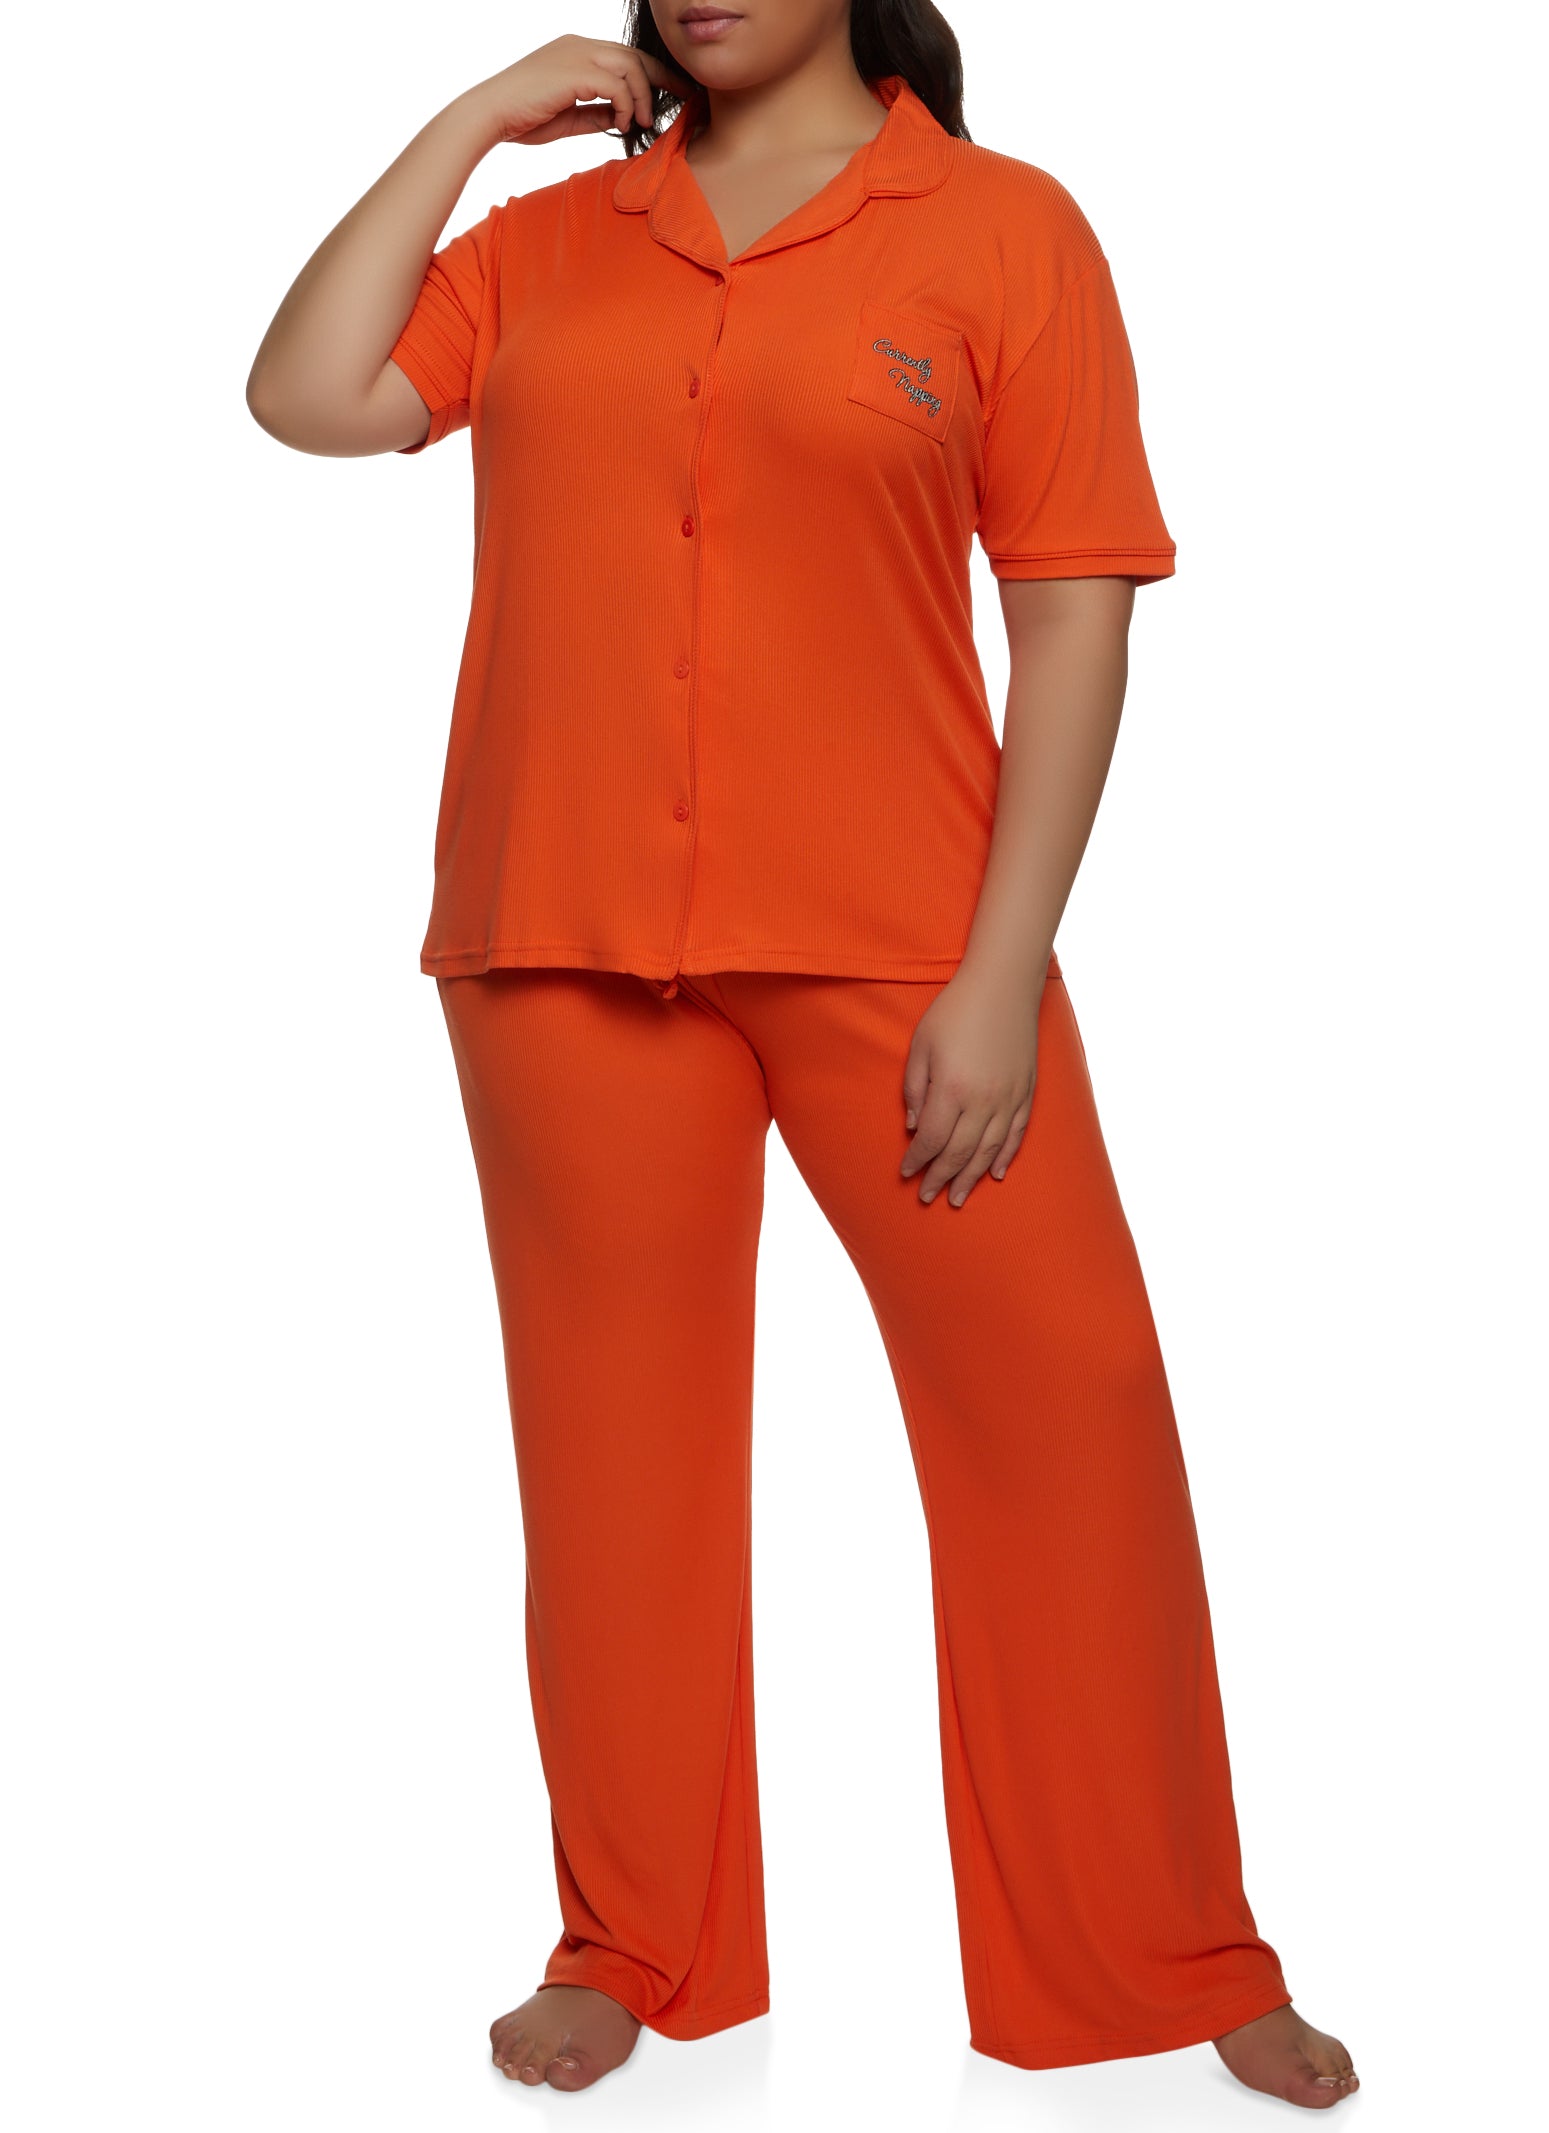 Plus Size Currently Napping Graphic Pocket Pajama Shirt and Pants - Orange